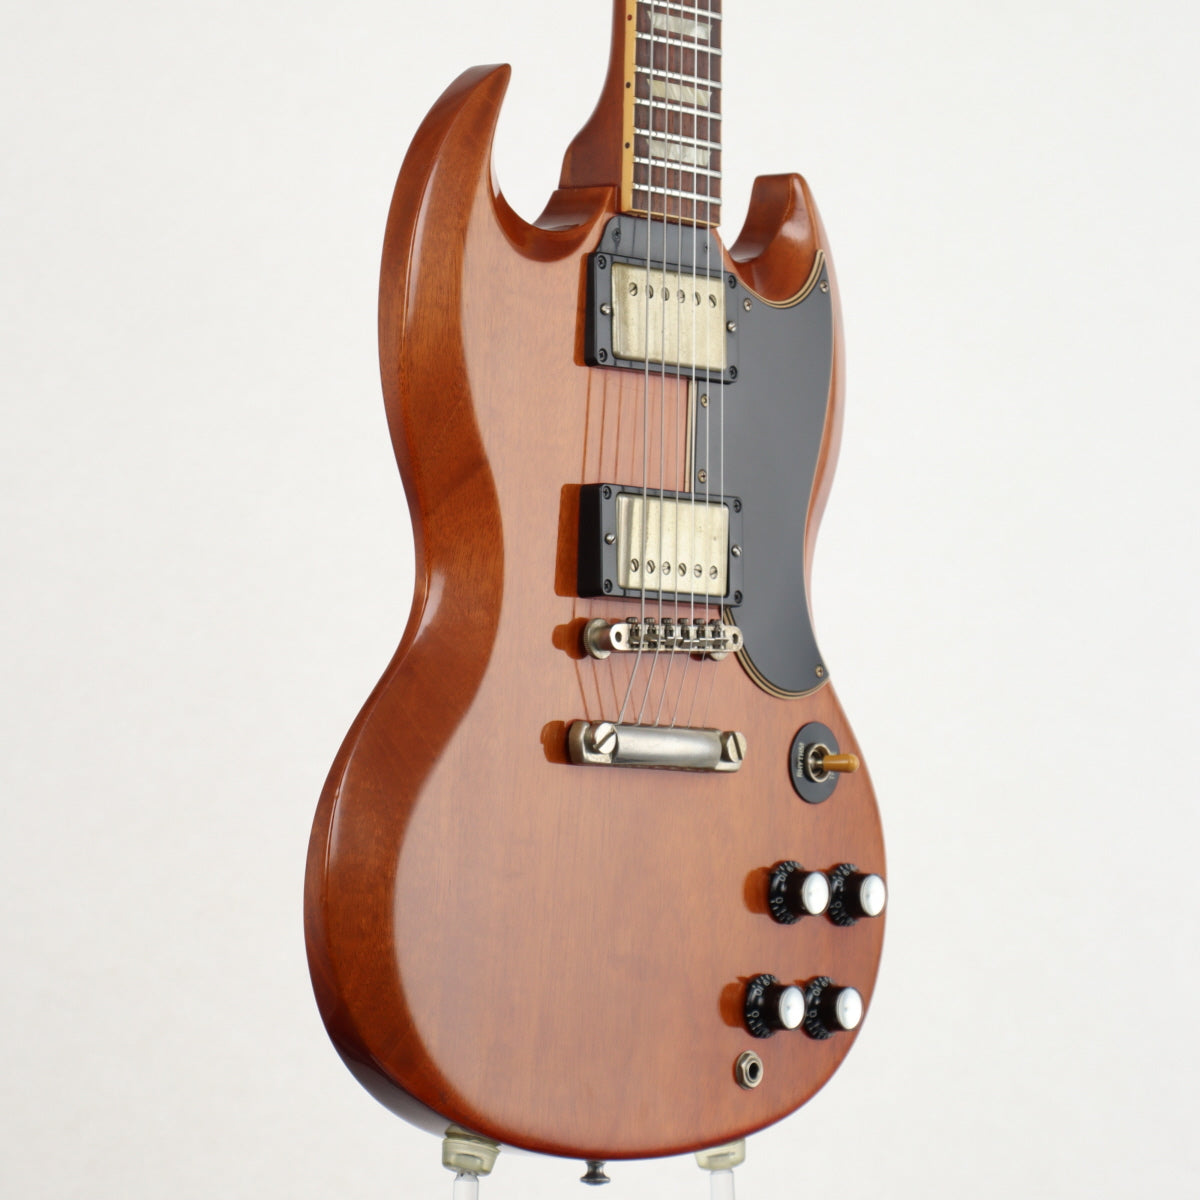 [SN 063832] USED Gibson Custom / Historic Collection SG Standard VOS Natural Walnut [11]